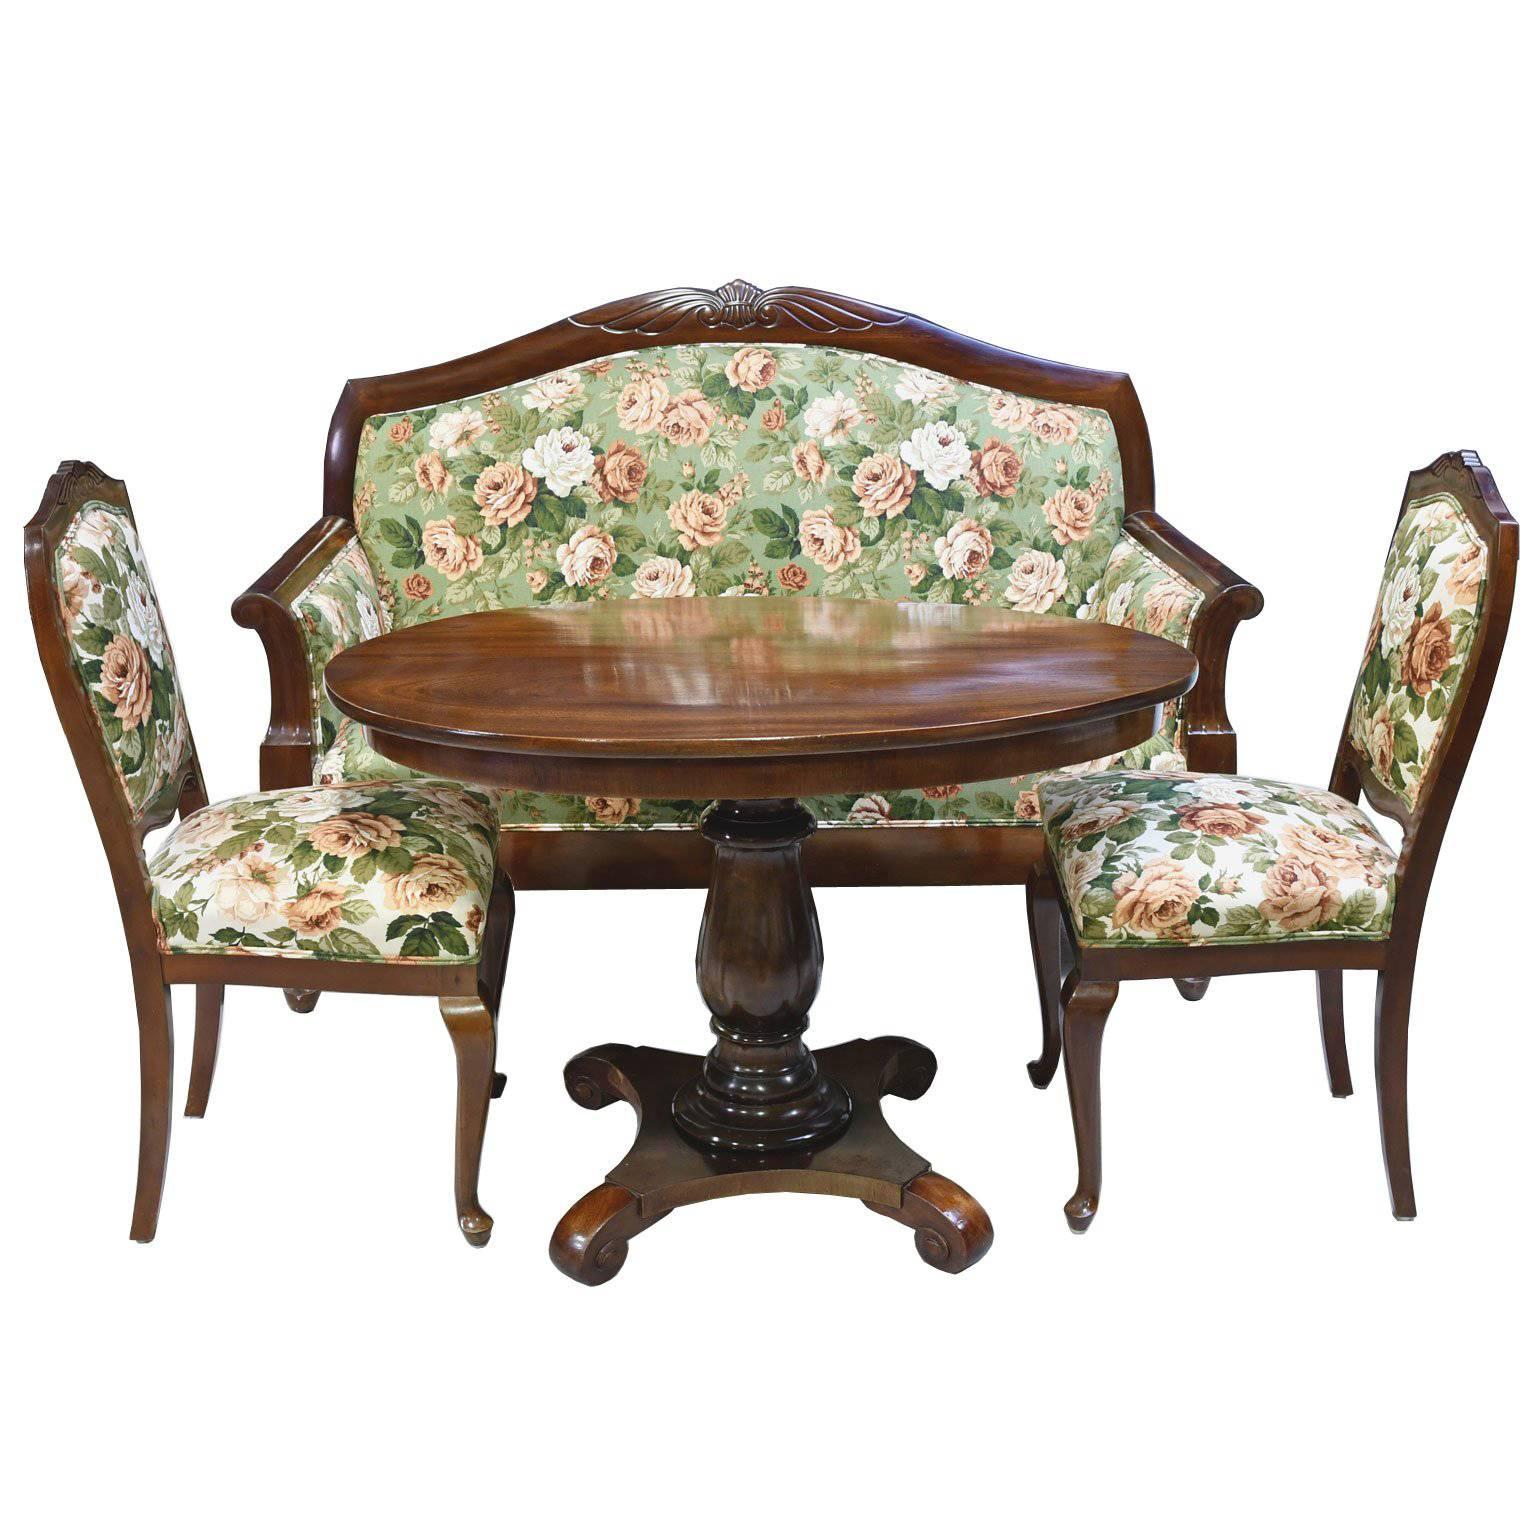 Early 20th Century Danish Parlor Suite with Sofa, Pair of Chairs and Oval Table